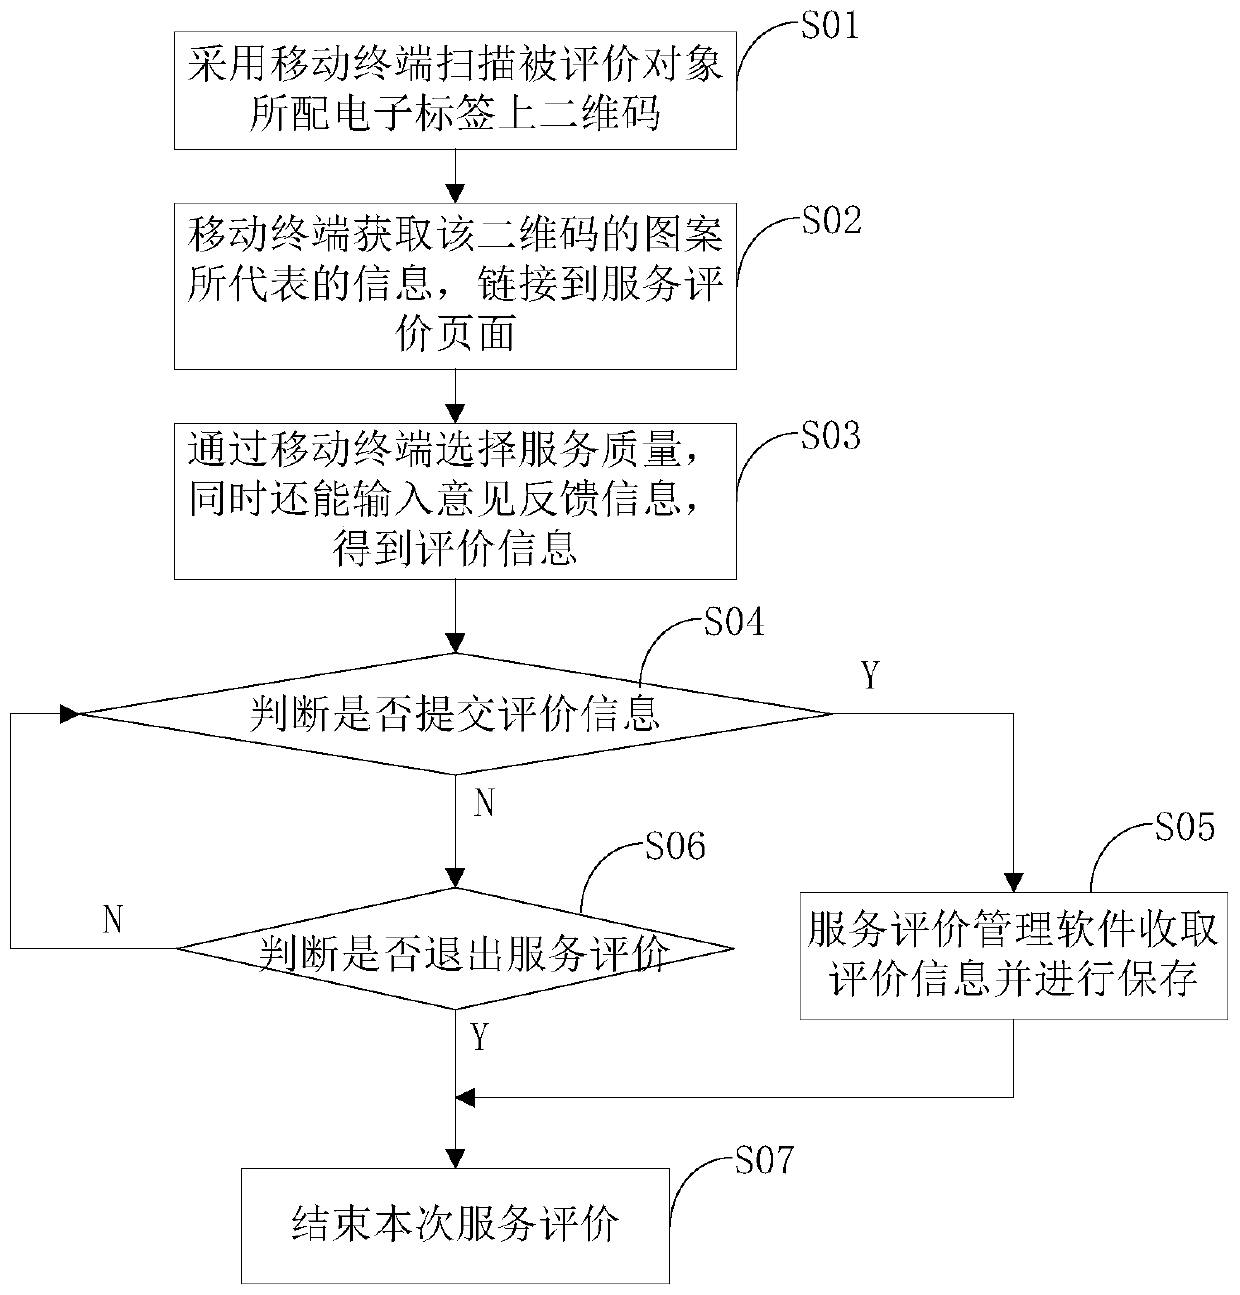 Service evaluation system and method based on electronic tag two-dimensional code